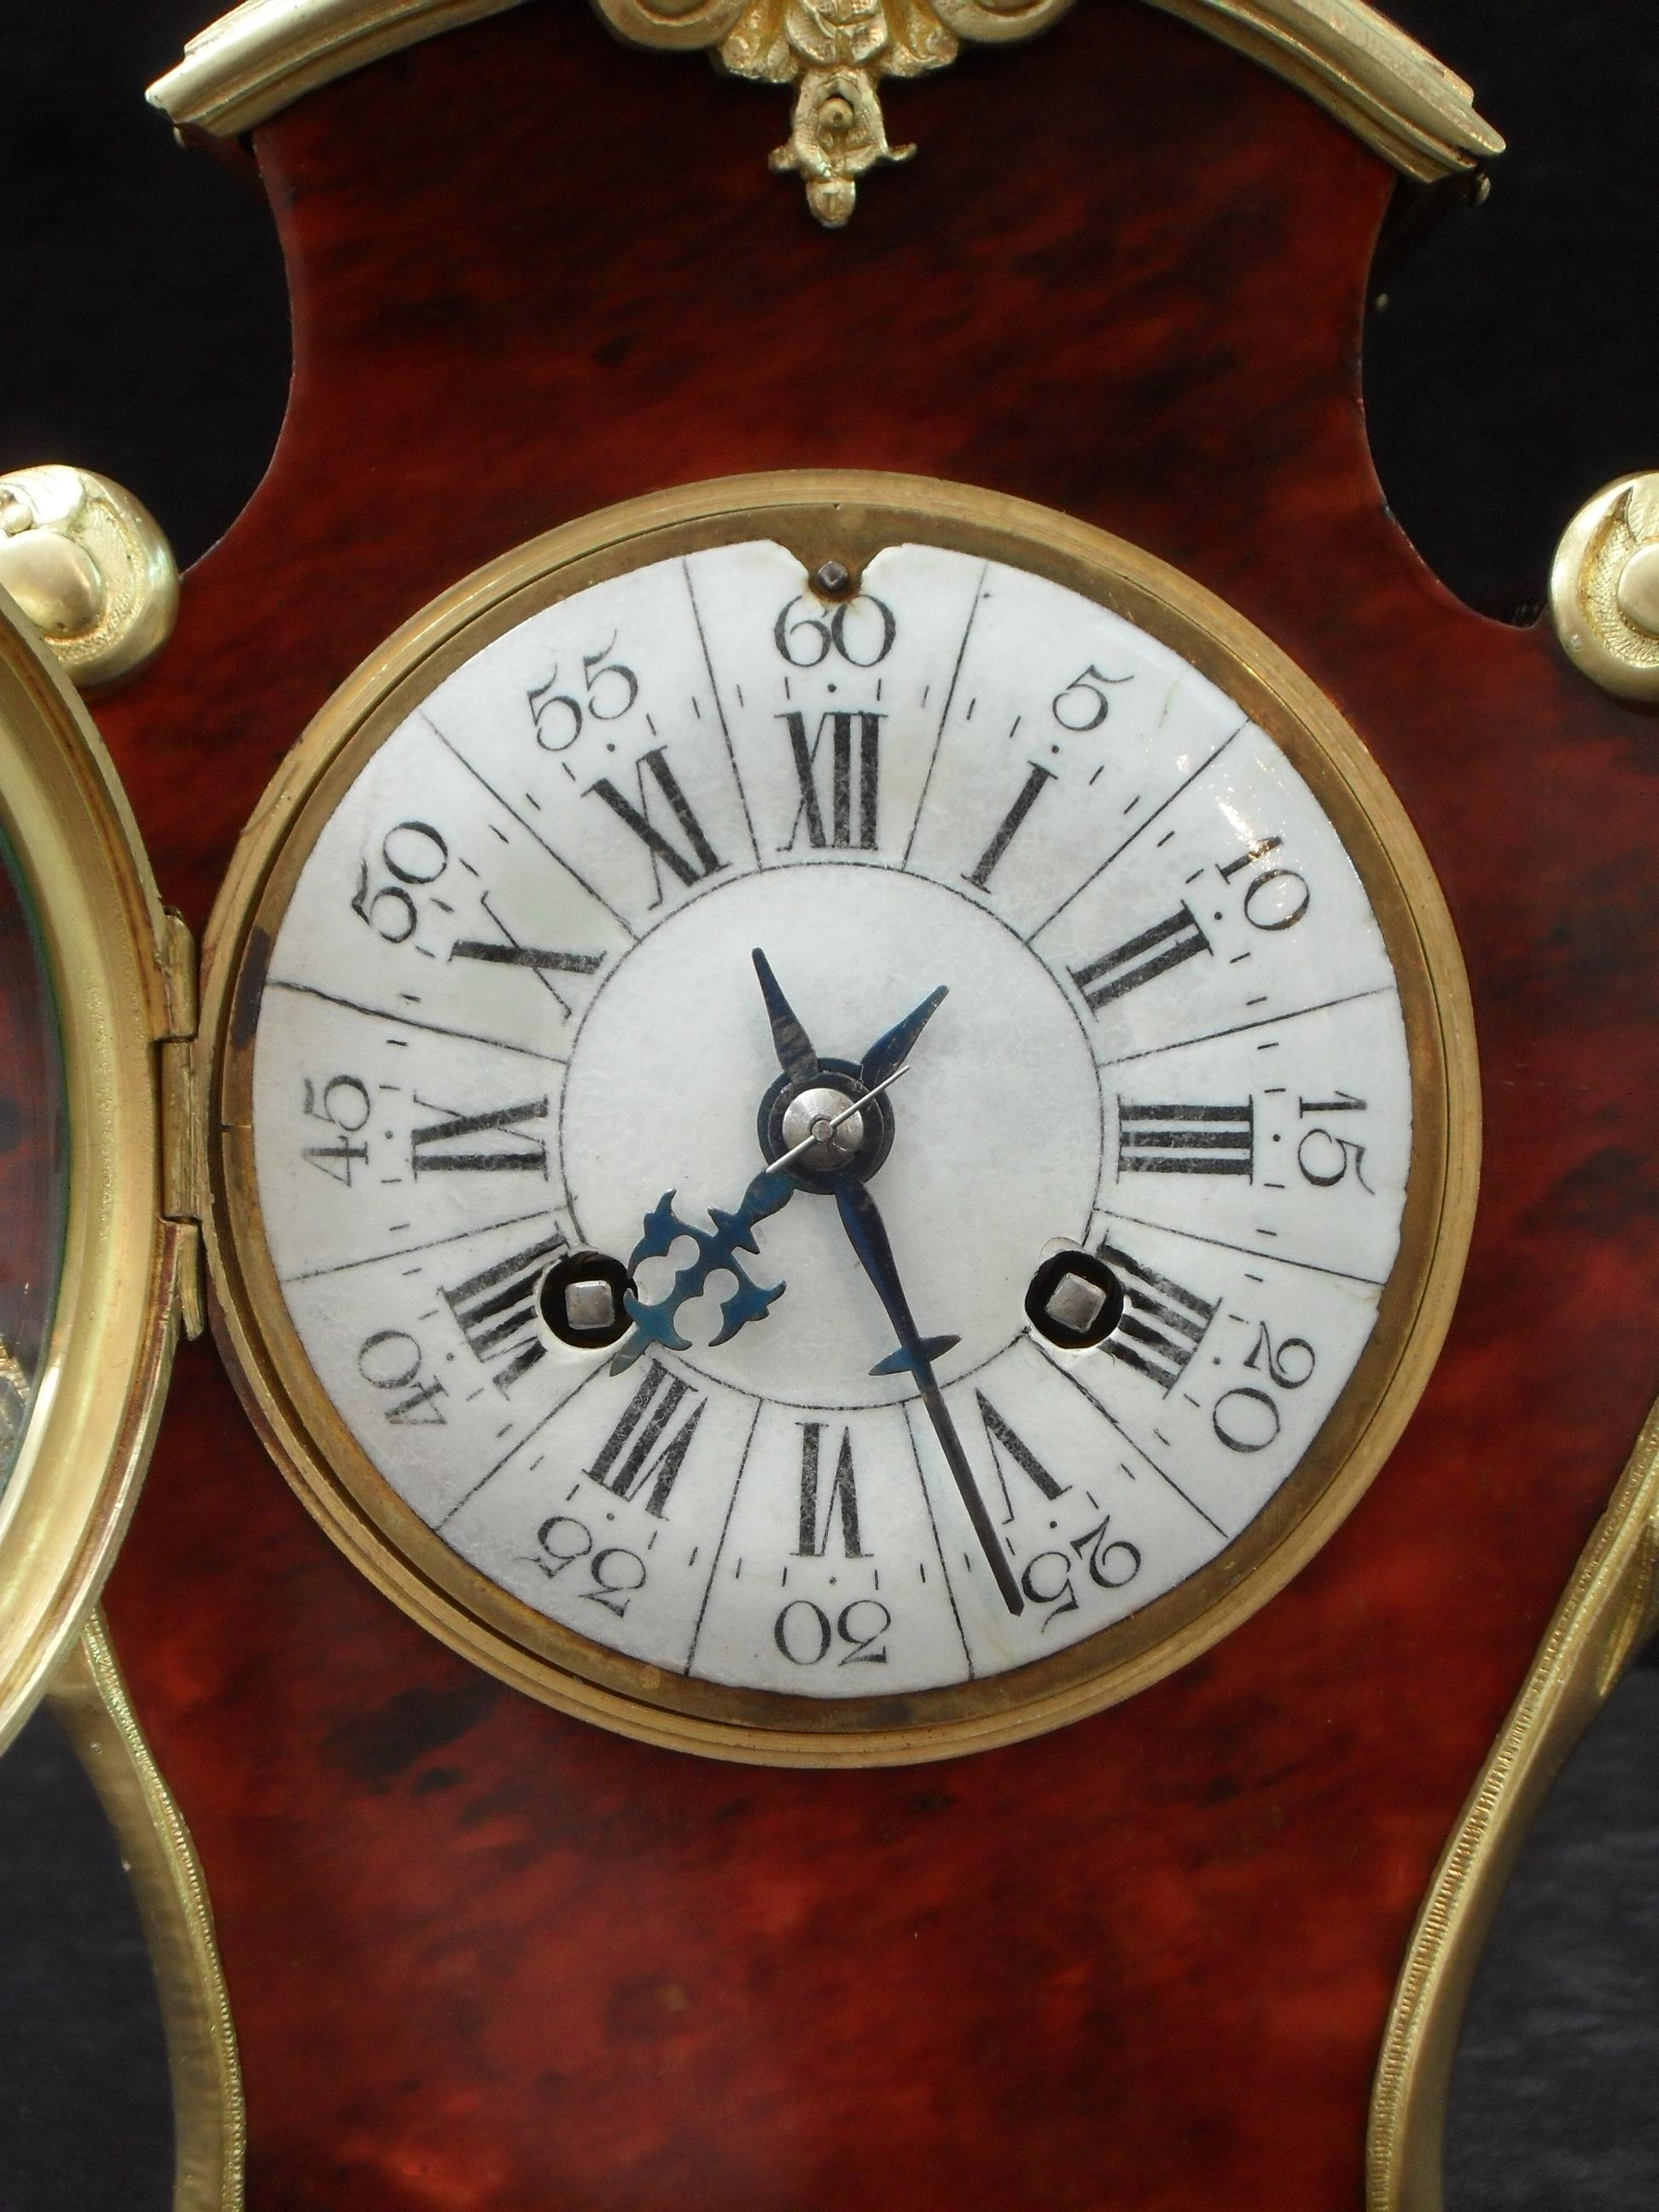 A very good quality French Louis XV style red tortoise shell serpentine shaped mantel clock with scroll leaf bronze gilt ormolu mounts and carrying handle. The clock has a white enamel dial with a French eight day movement which strikes the hours